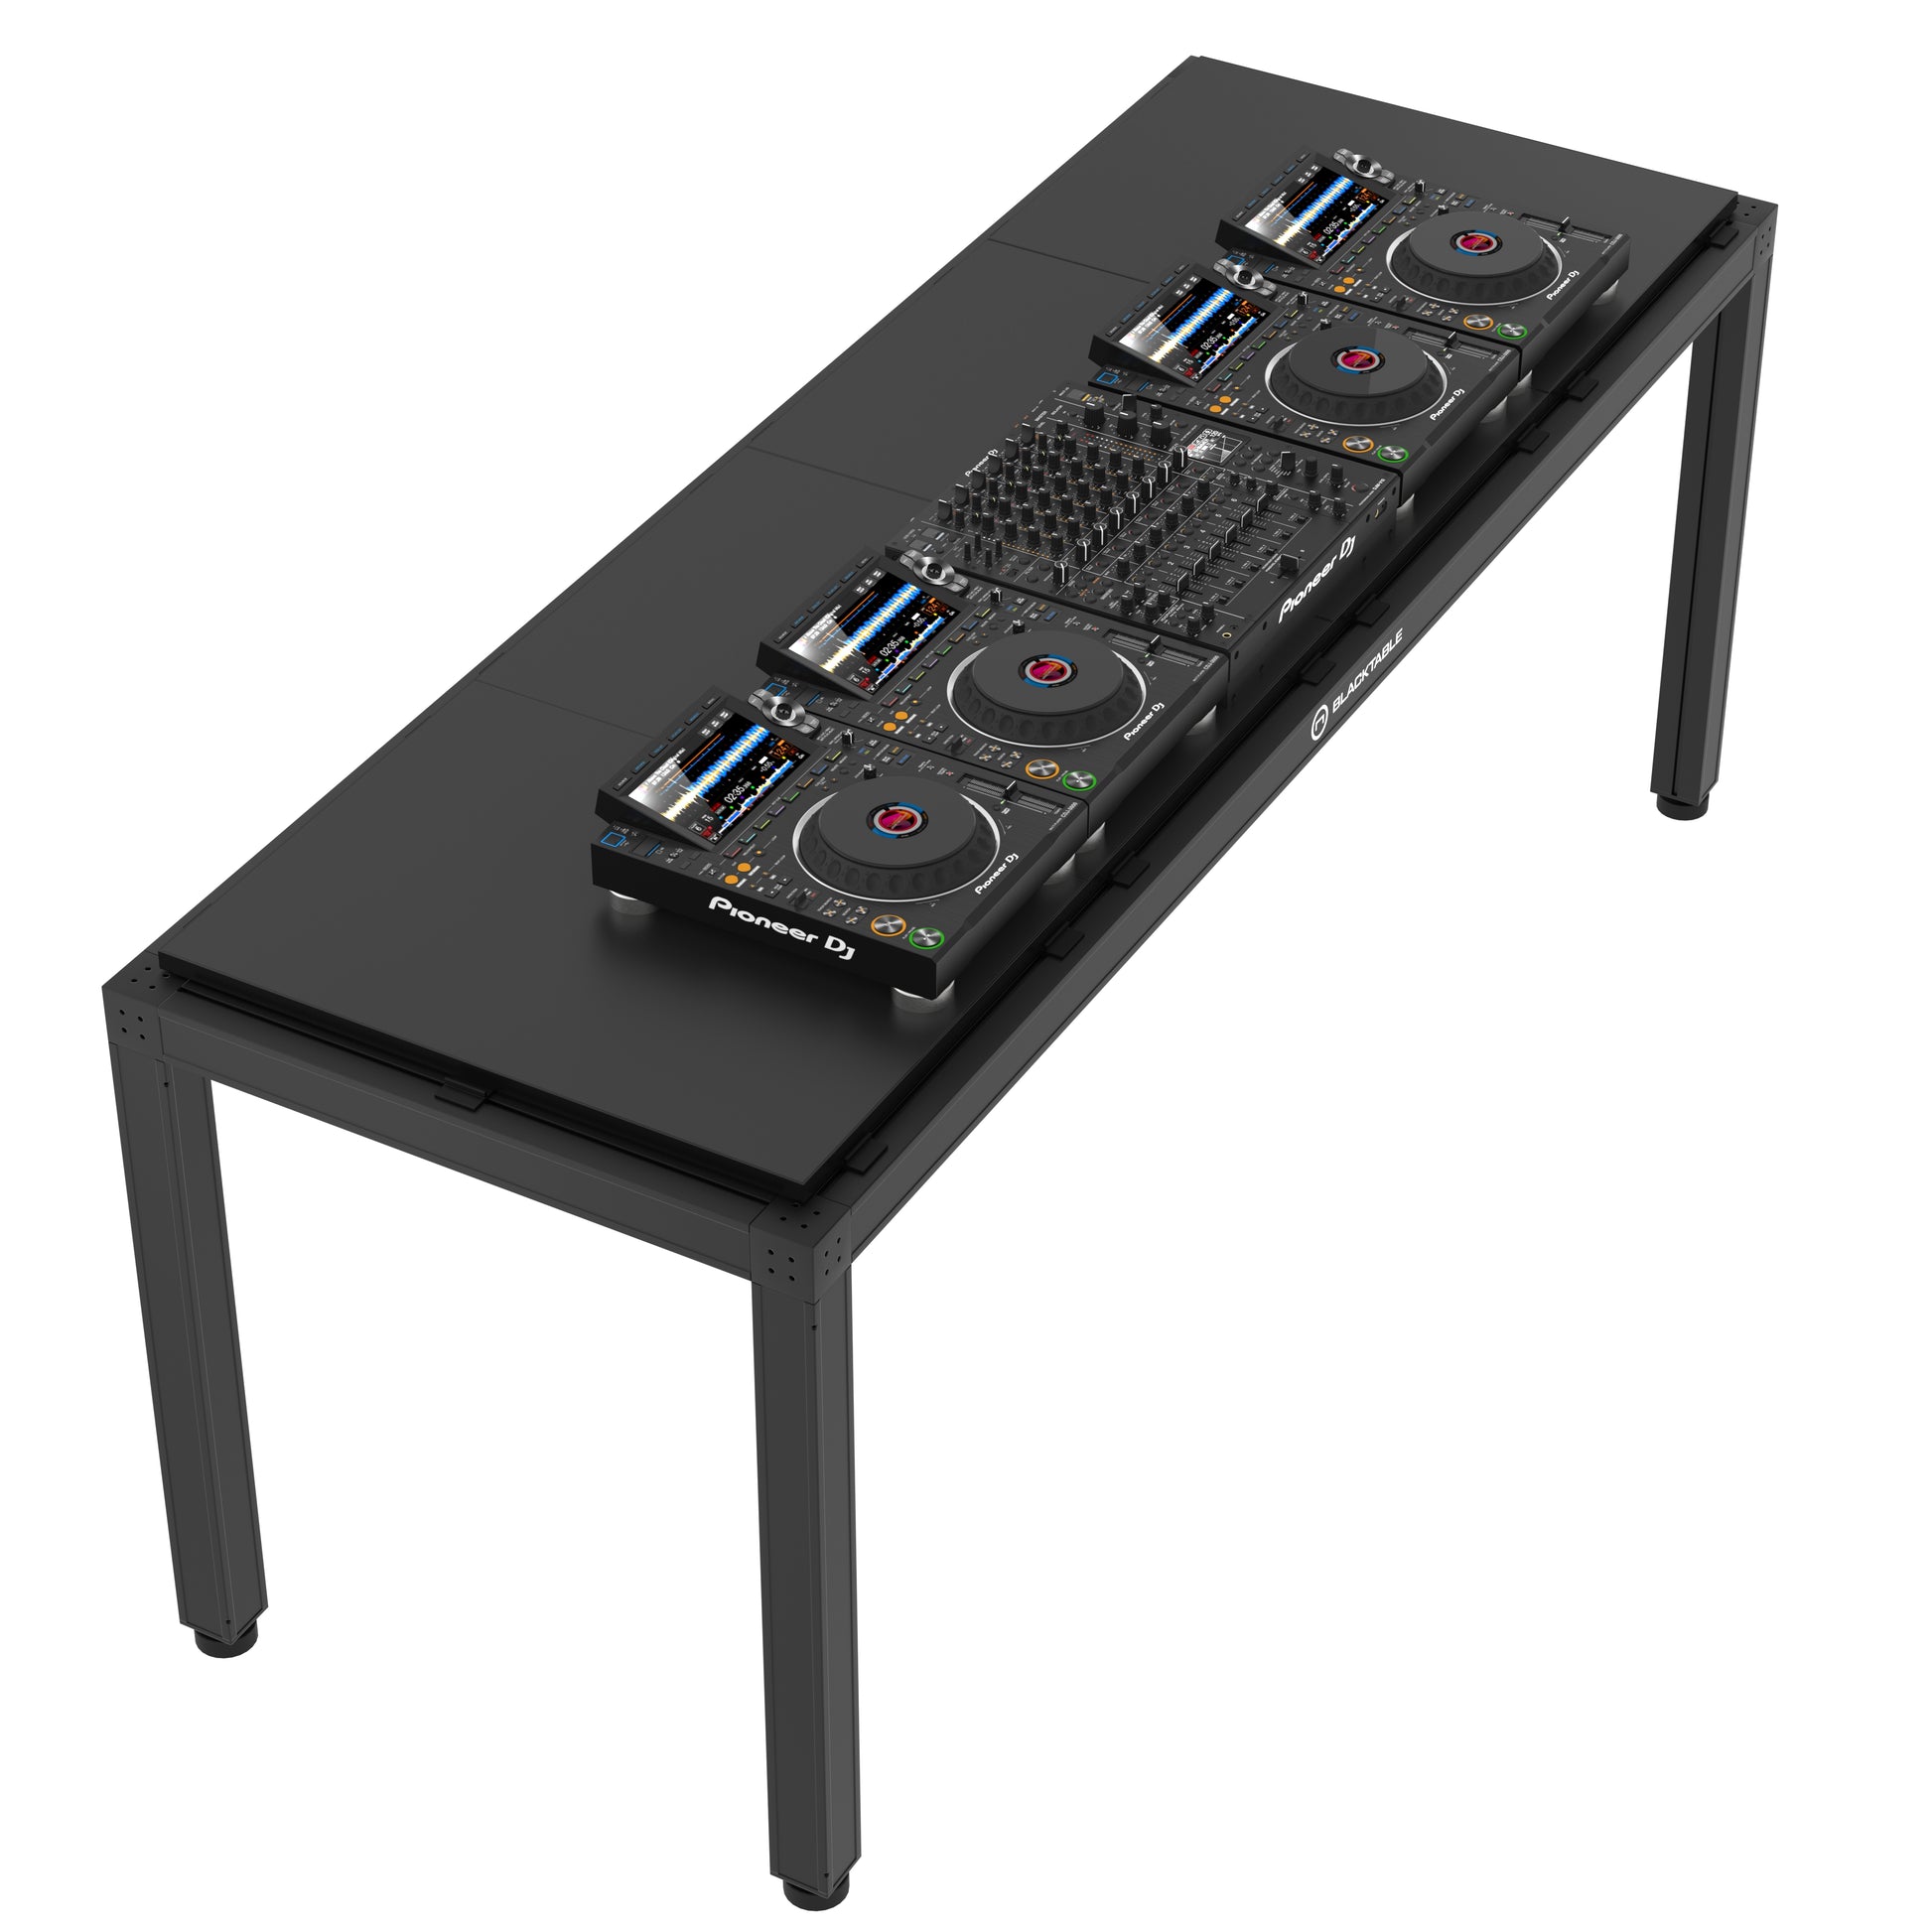 The Blacktable 240 DJ Table is a professional-grade table designed for DJs using complex setups. The surface measures 240 cm x 80 cm and features four players and a professional mixer. The table has a sturdy build and a weatherproof finish, making it suitable for outdoor performances.